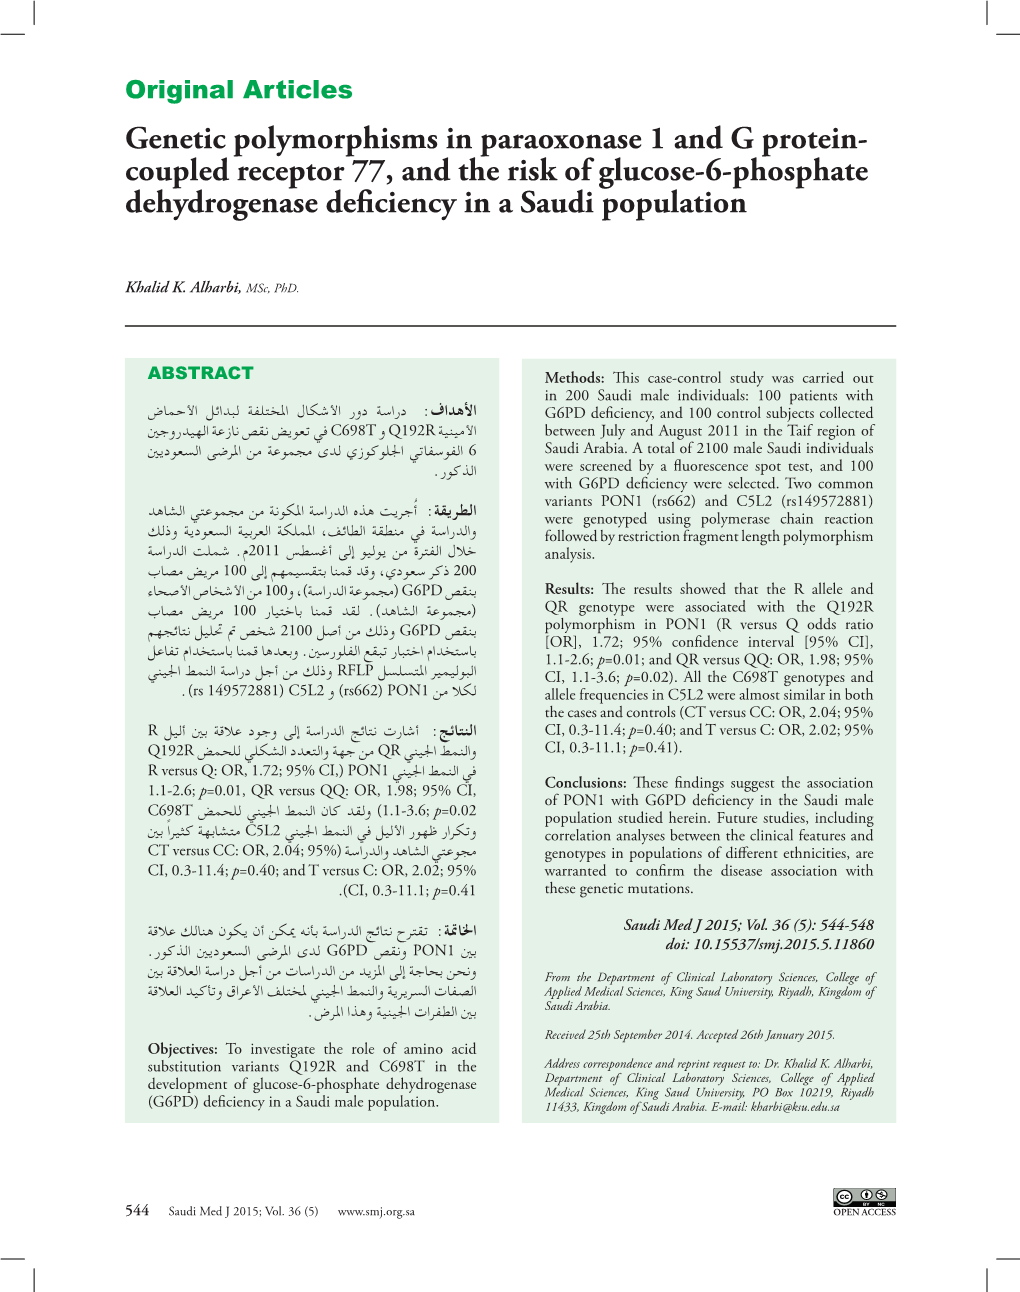 Genetic Polymorphisms in Paraoxonase 1 and G Protein- Coupled Receptor 77, and the Risk of Glucose-6-Phosphate Dehydrogenase Deficiency in a Saudi Population